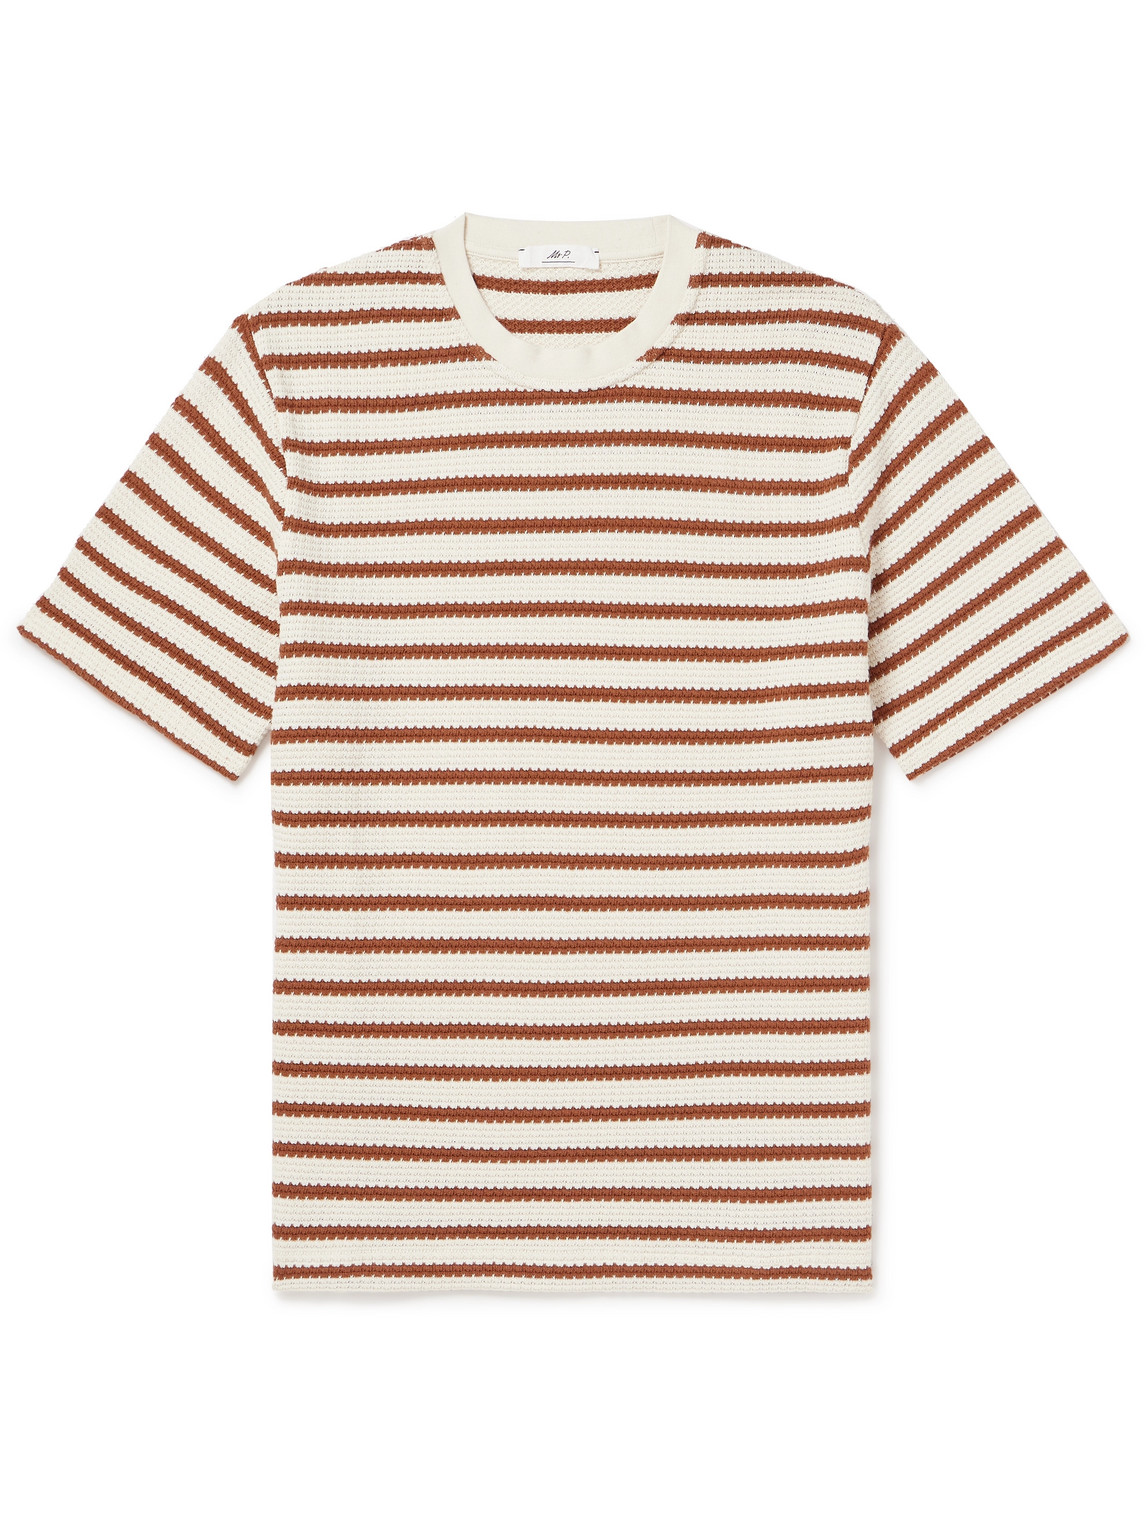 Mr P Striped Open-knit Organic Cotton T-shirt In Brown